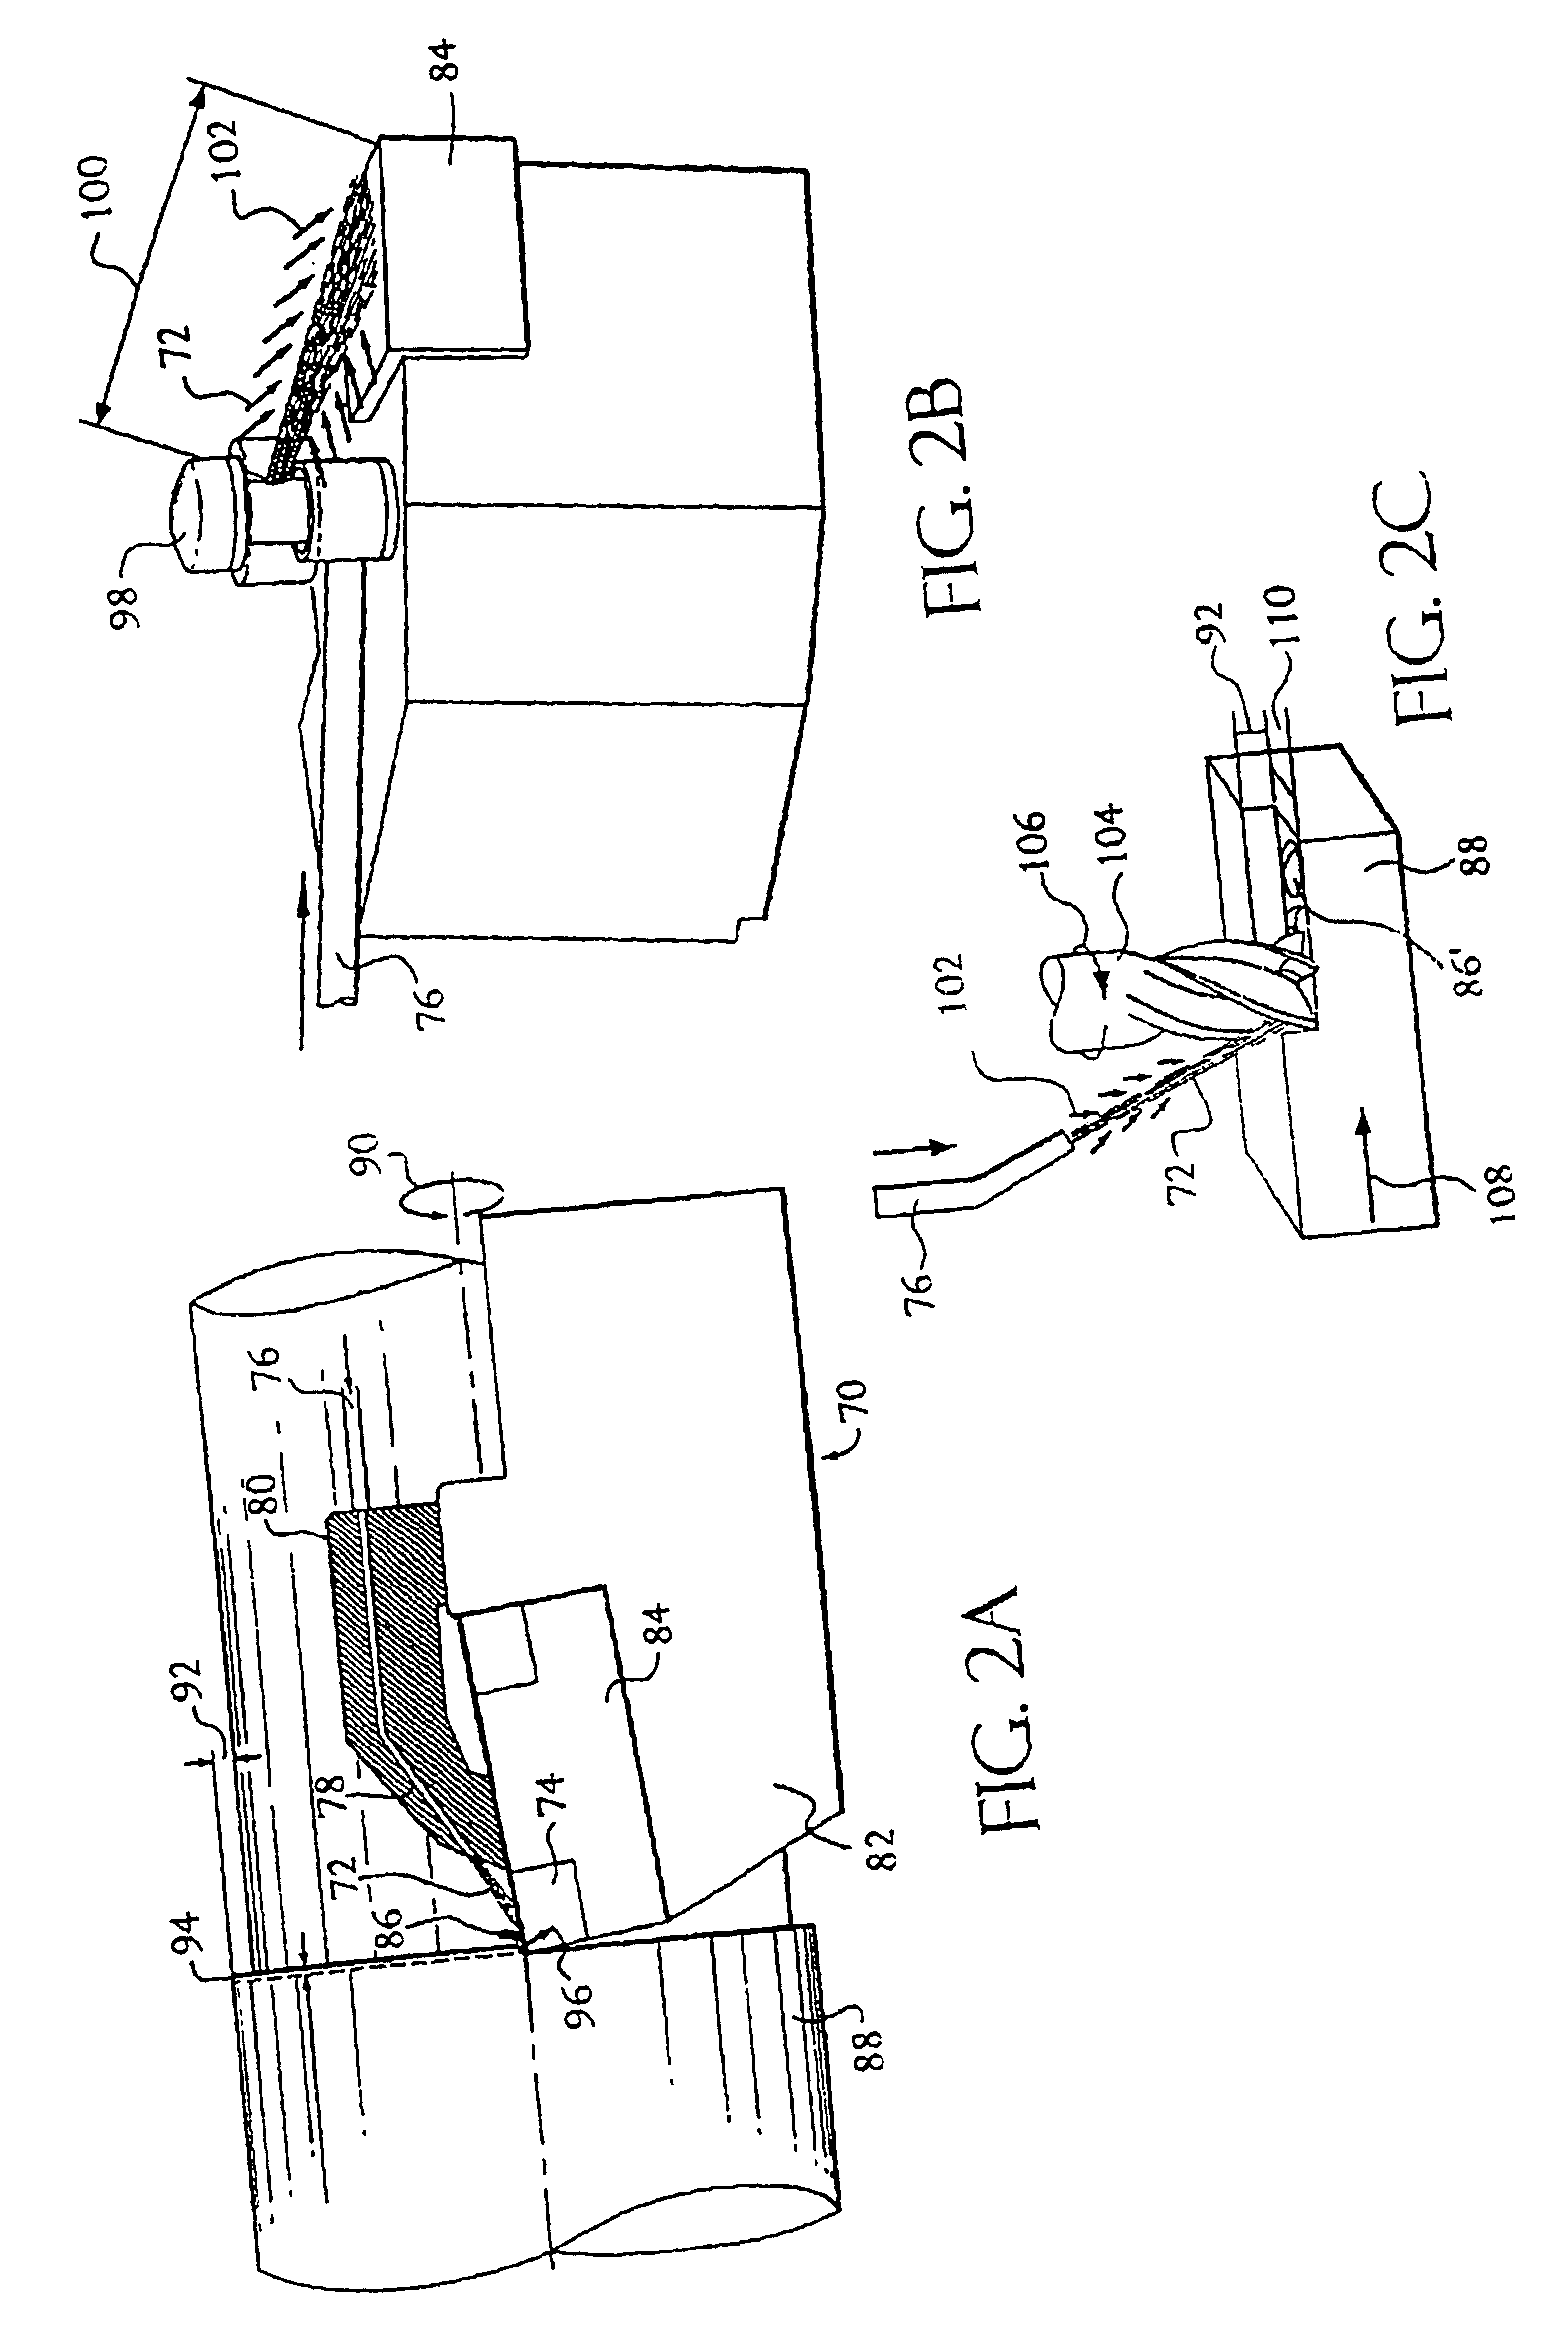 Apparatus and method of cryogenic cooling for high-energy cutting operations